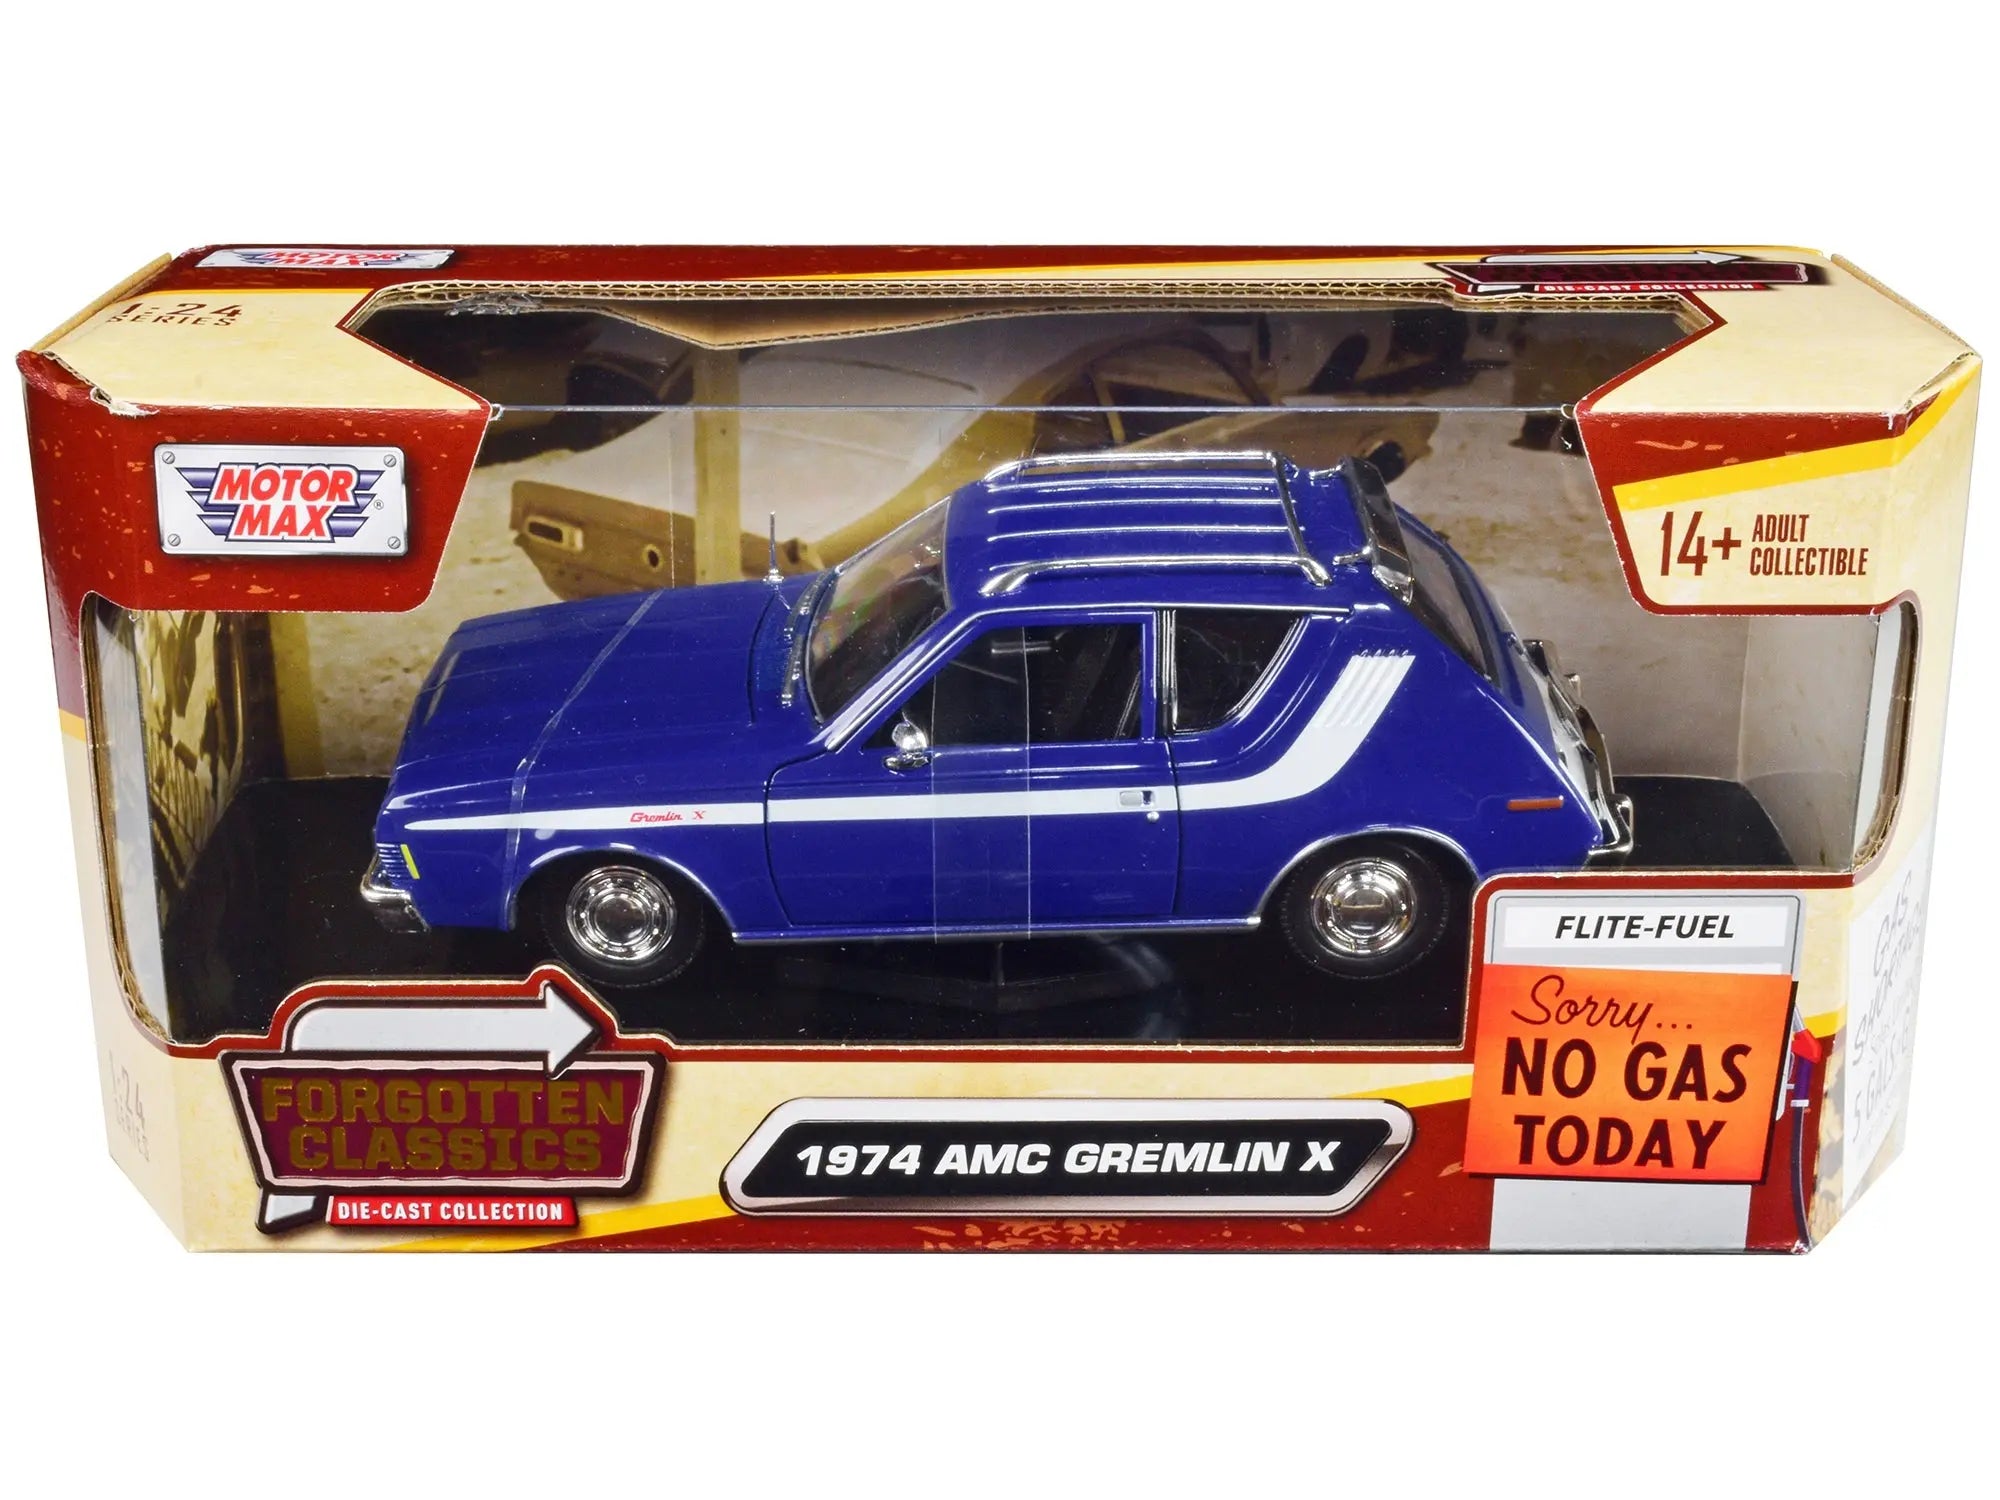 1974 AMC Gremlin X Blue with White Stripes and Roof Rack "Forgotten Classics" Series 1/24 Diecast Model Car by Motormax Motormax